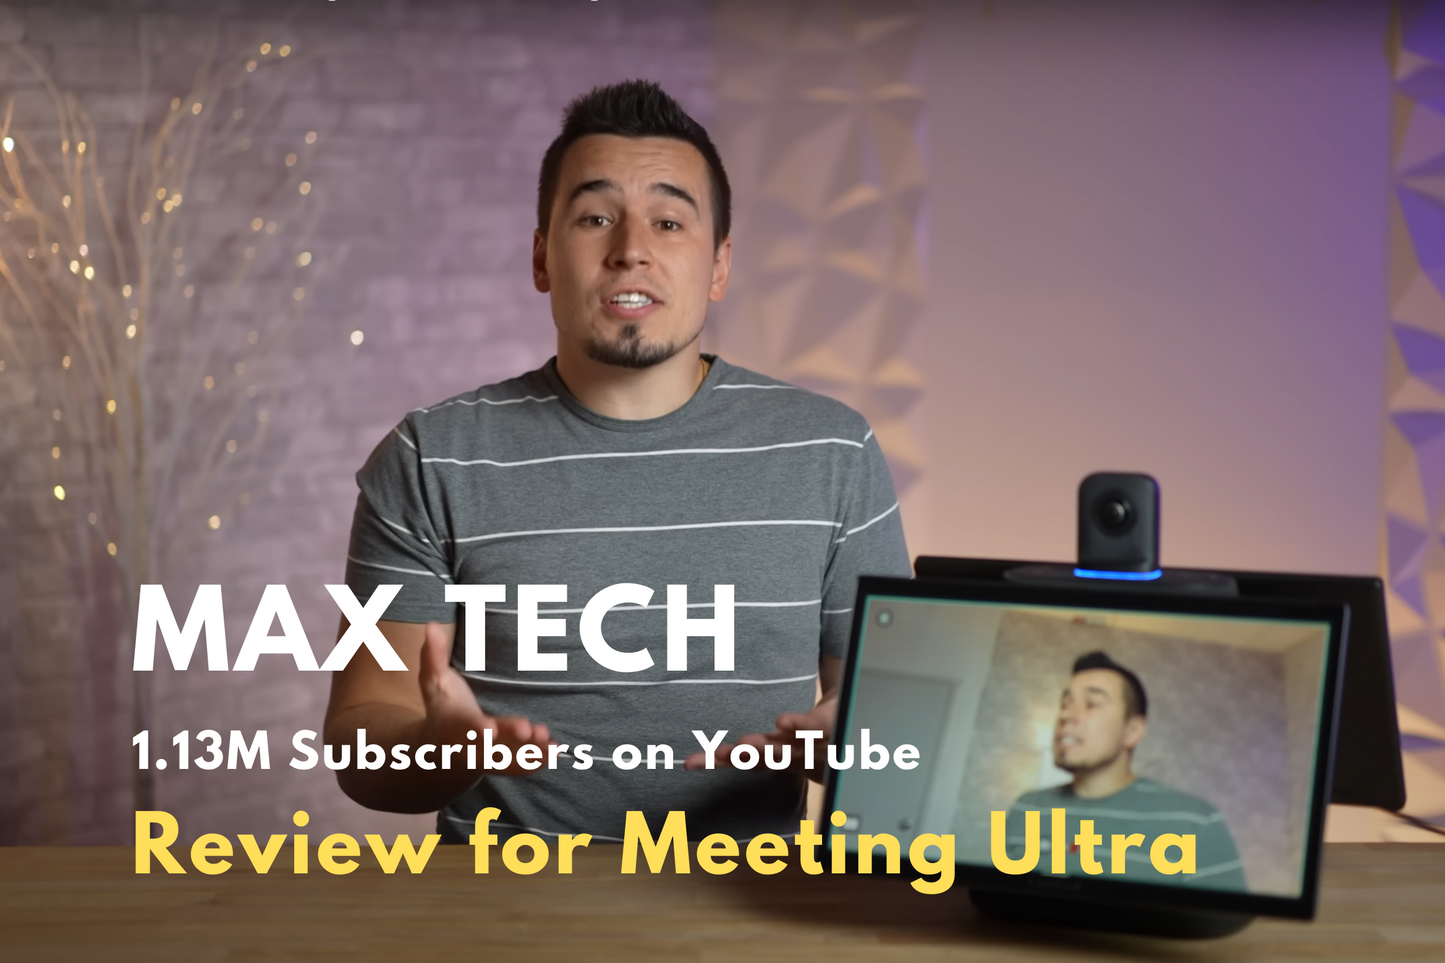 360° All-in-One Web-Conferencing! - Kandao Meeting Ultra Review by Max Tech